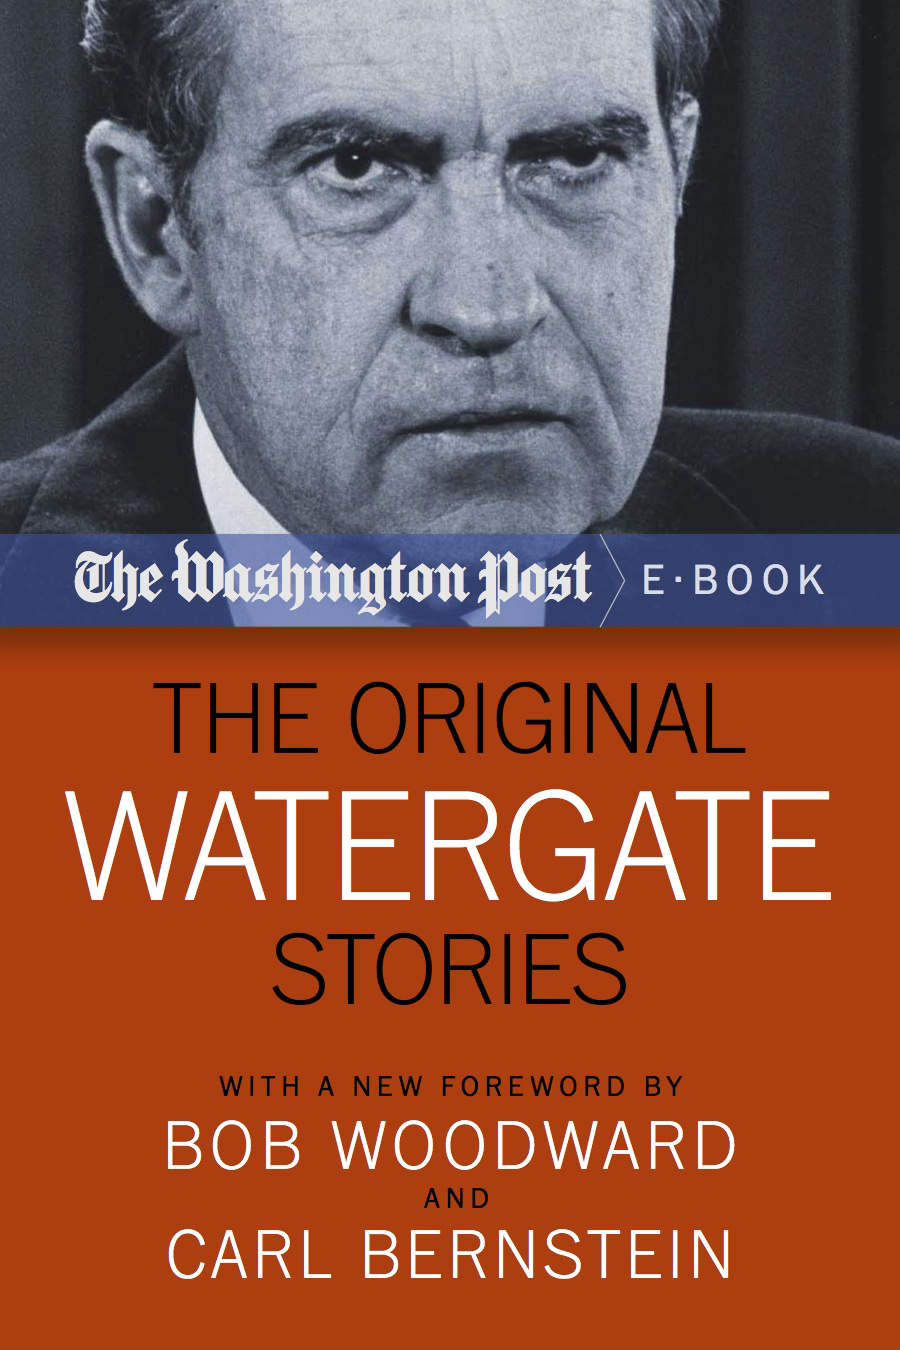 The Original Watergate Stories By The Washington Post Foreword by Bob Woodward - photo 1